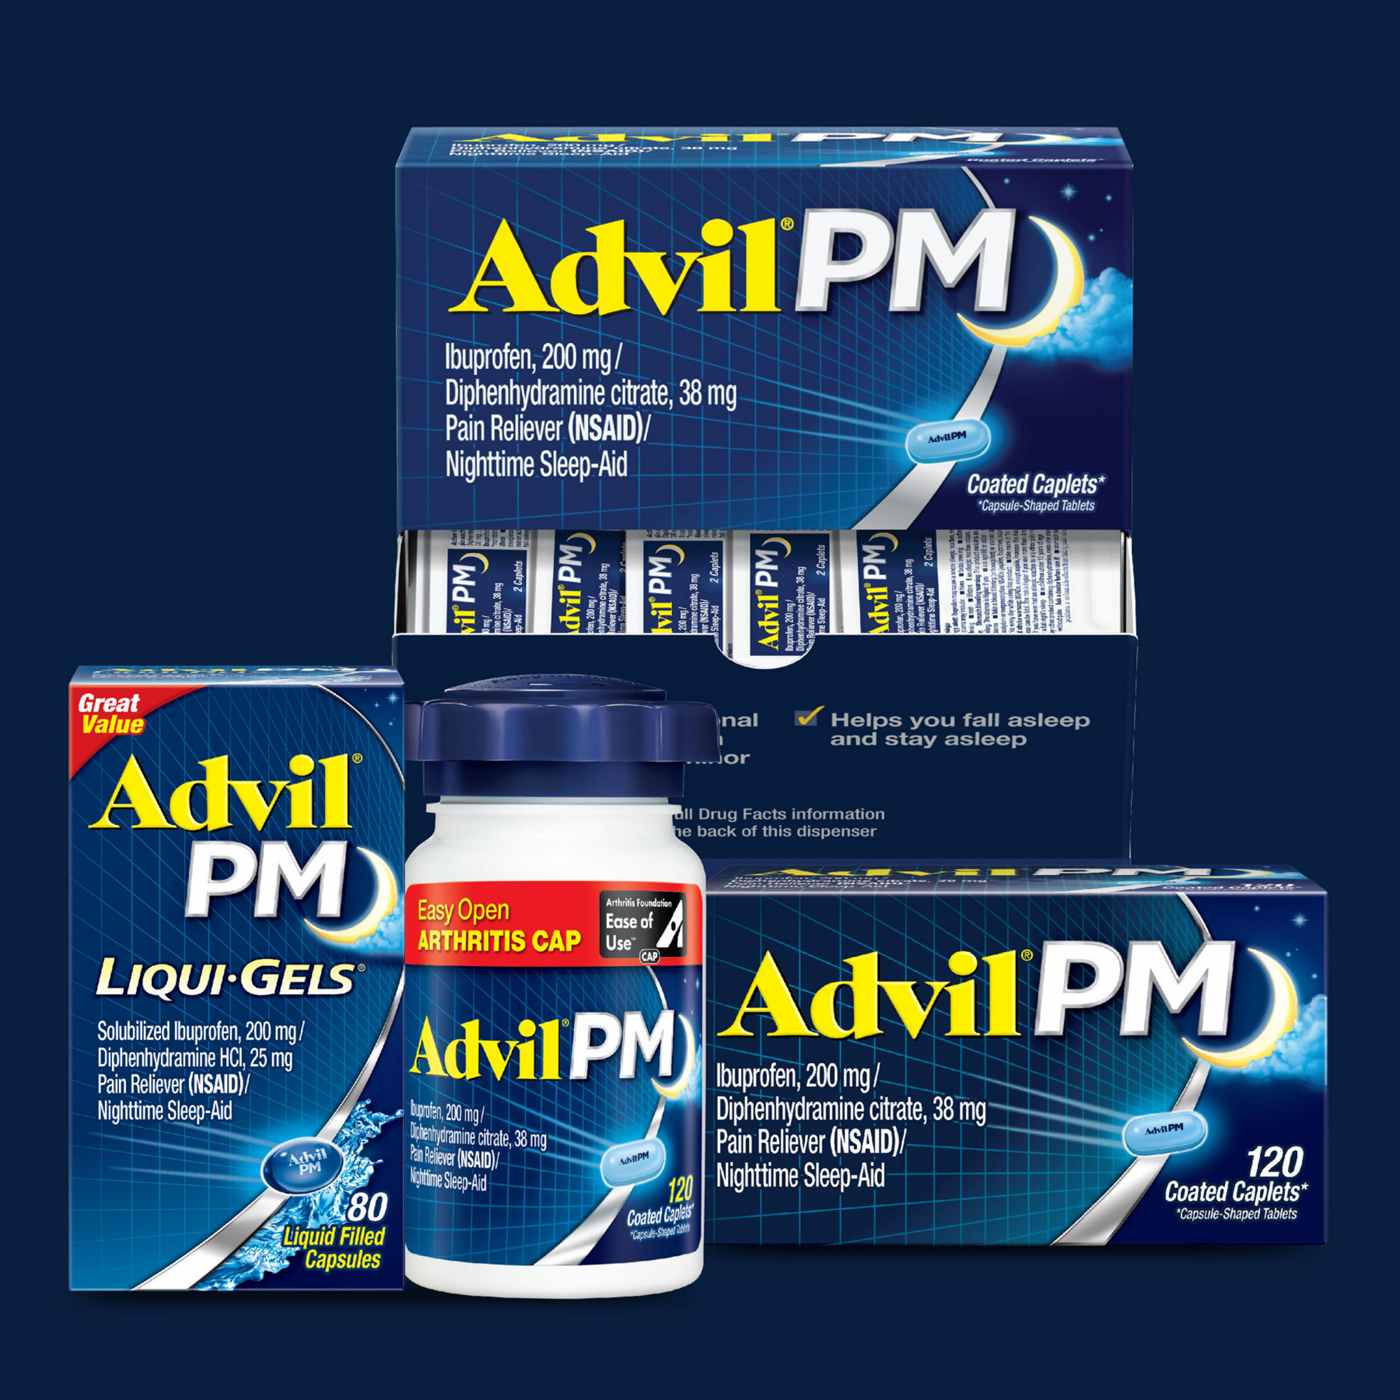 Advil PM Pain Reliever & Nighttime Sleep Aid Coated Caplets; image 7 of 8